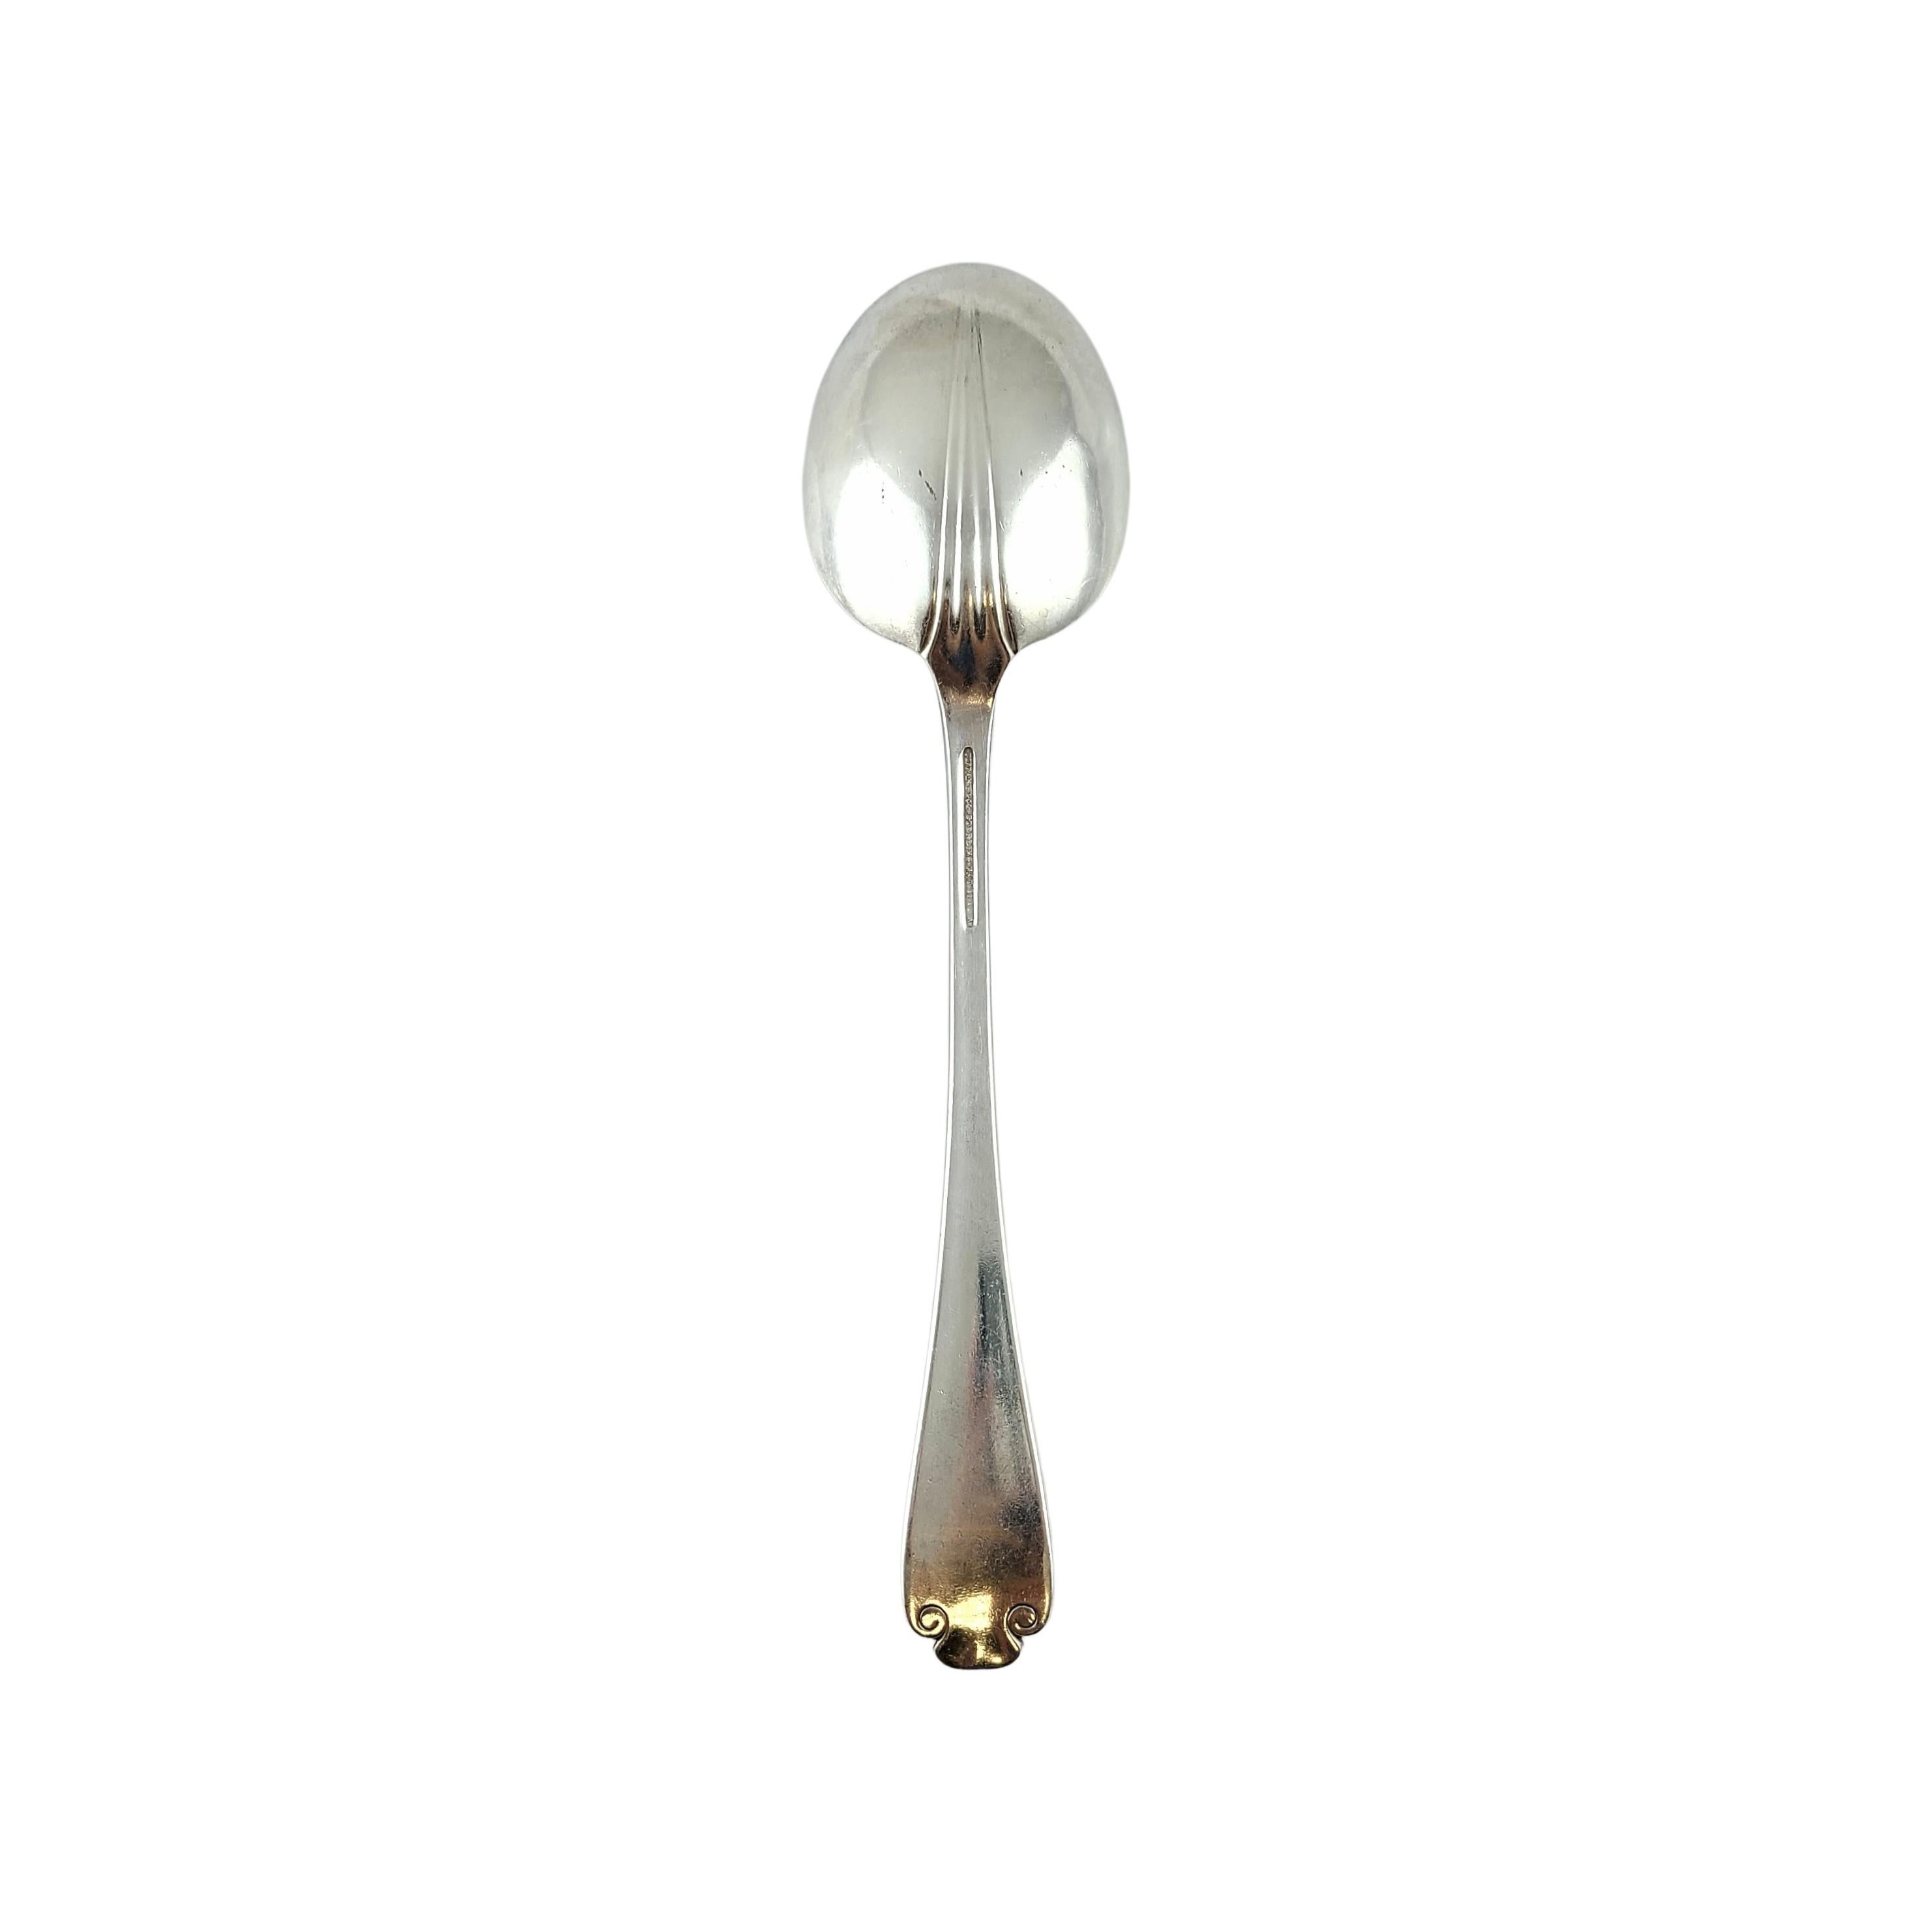 Sterling silver vegetable serving spoon by Tiffany & Co in the Flemish pattern.

Monogram appears to be LHA

Beautiful heavy serving spoon in the Flemish pattern, featuring a simple and elegant scroll design, making it a timeless classic that is